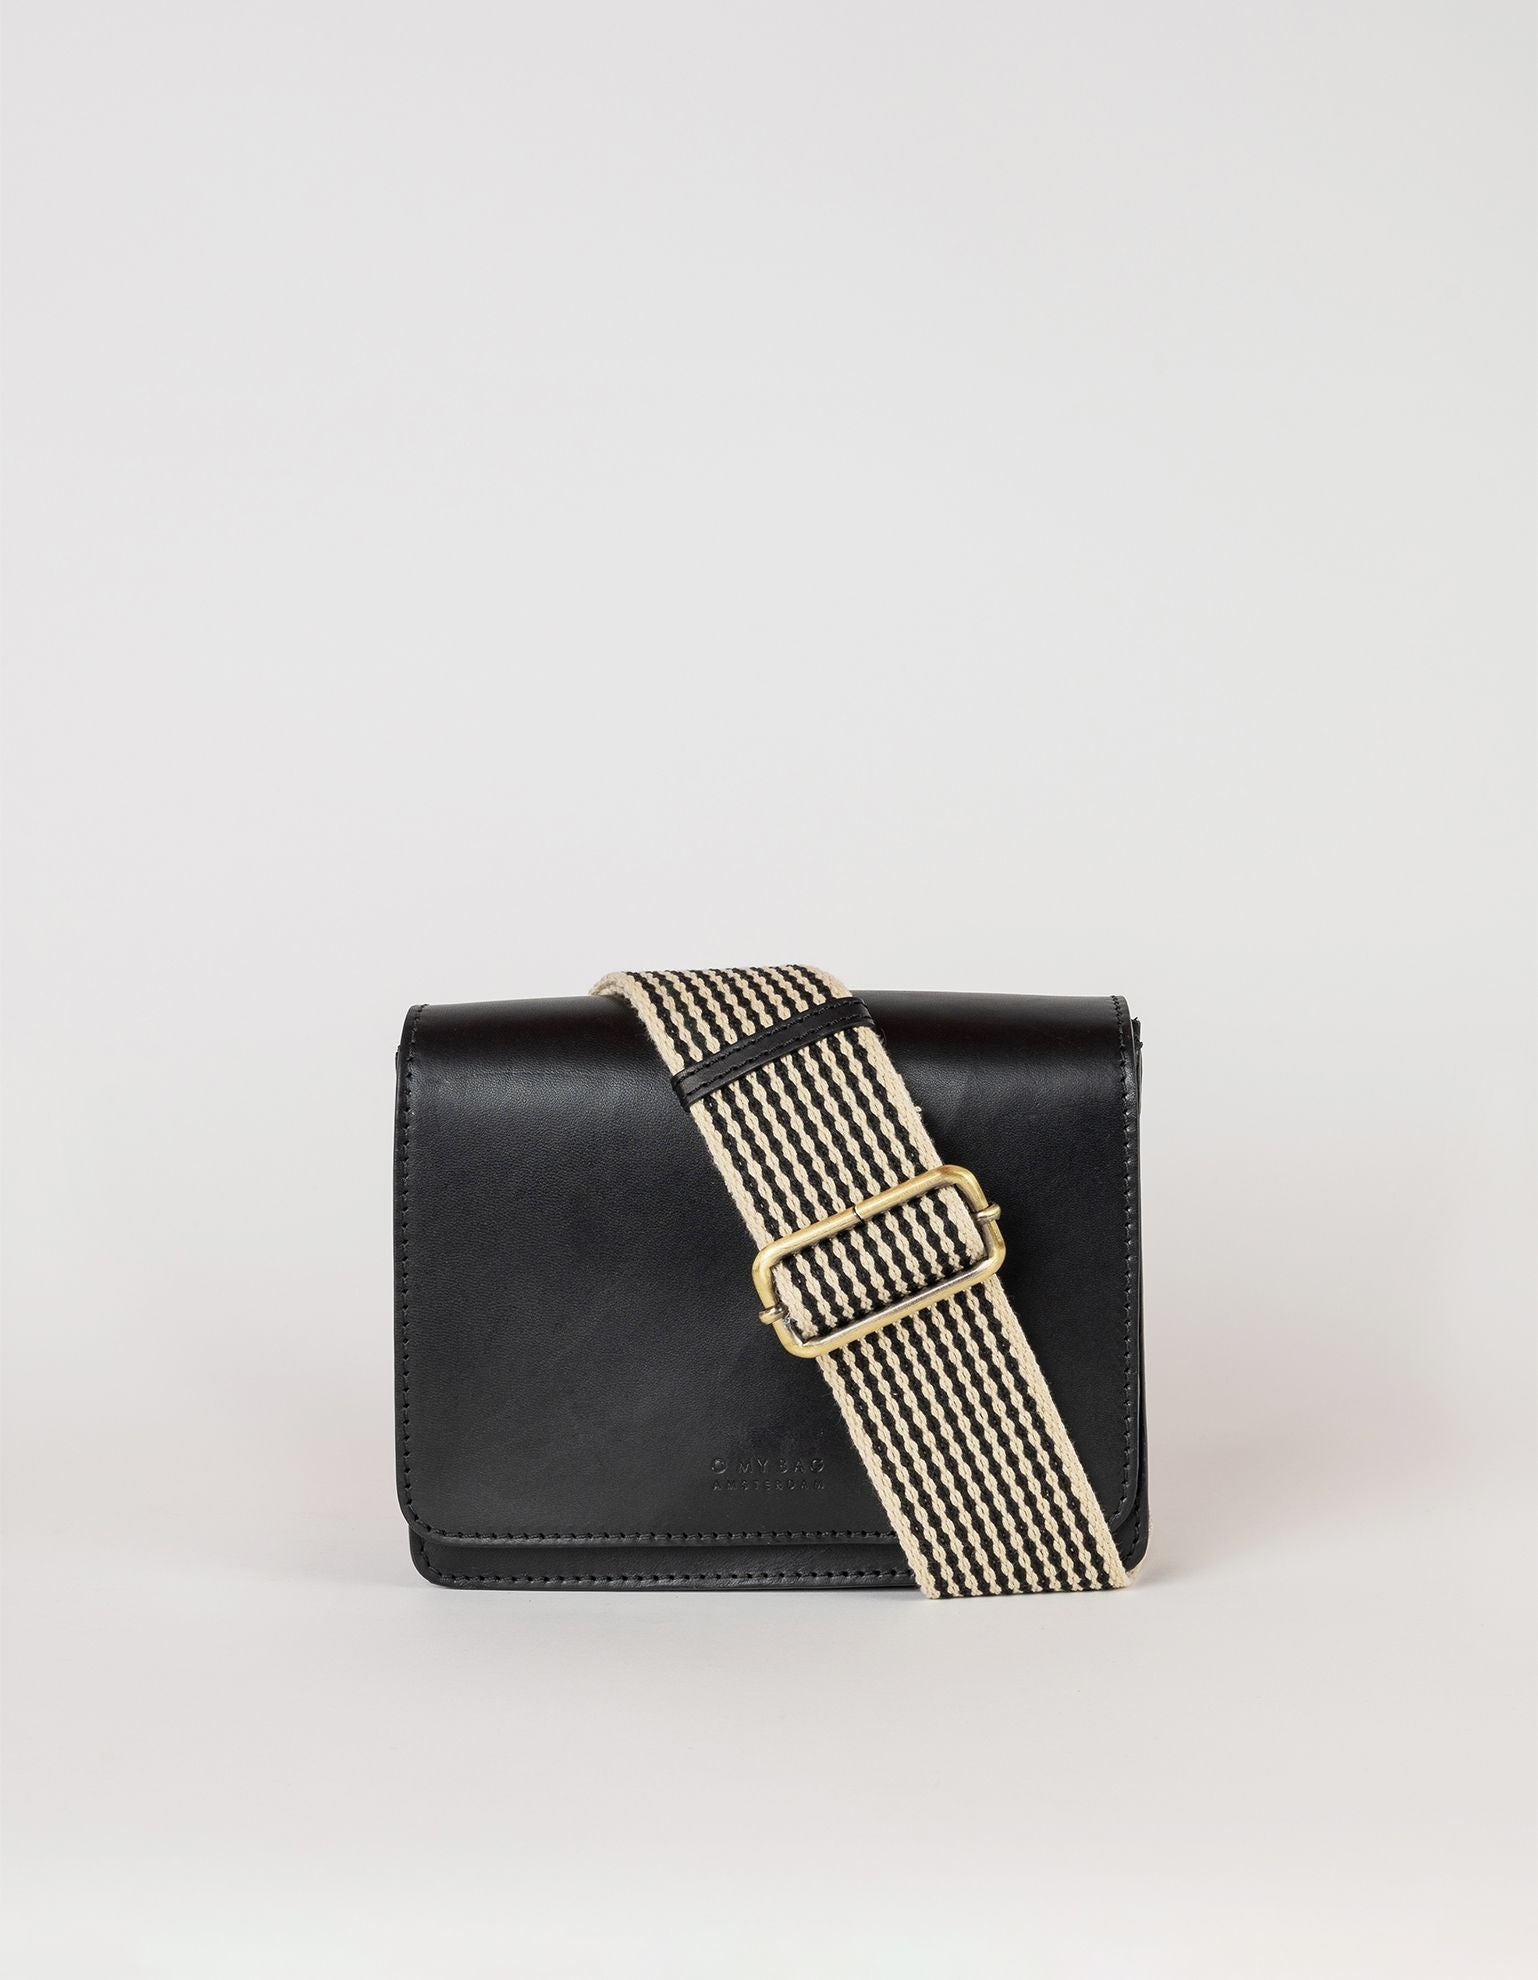 Audrey mini black classic leather bag. Front product image. With webbing strap.